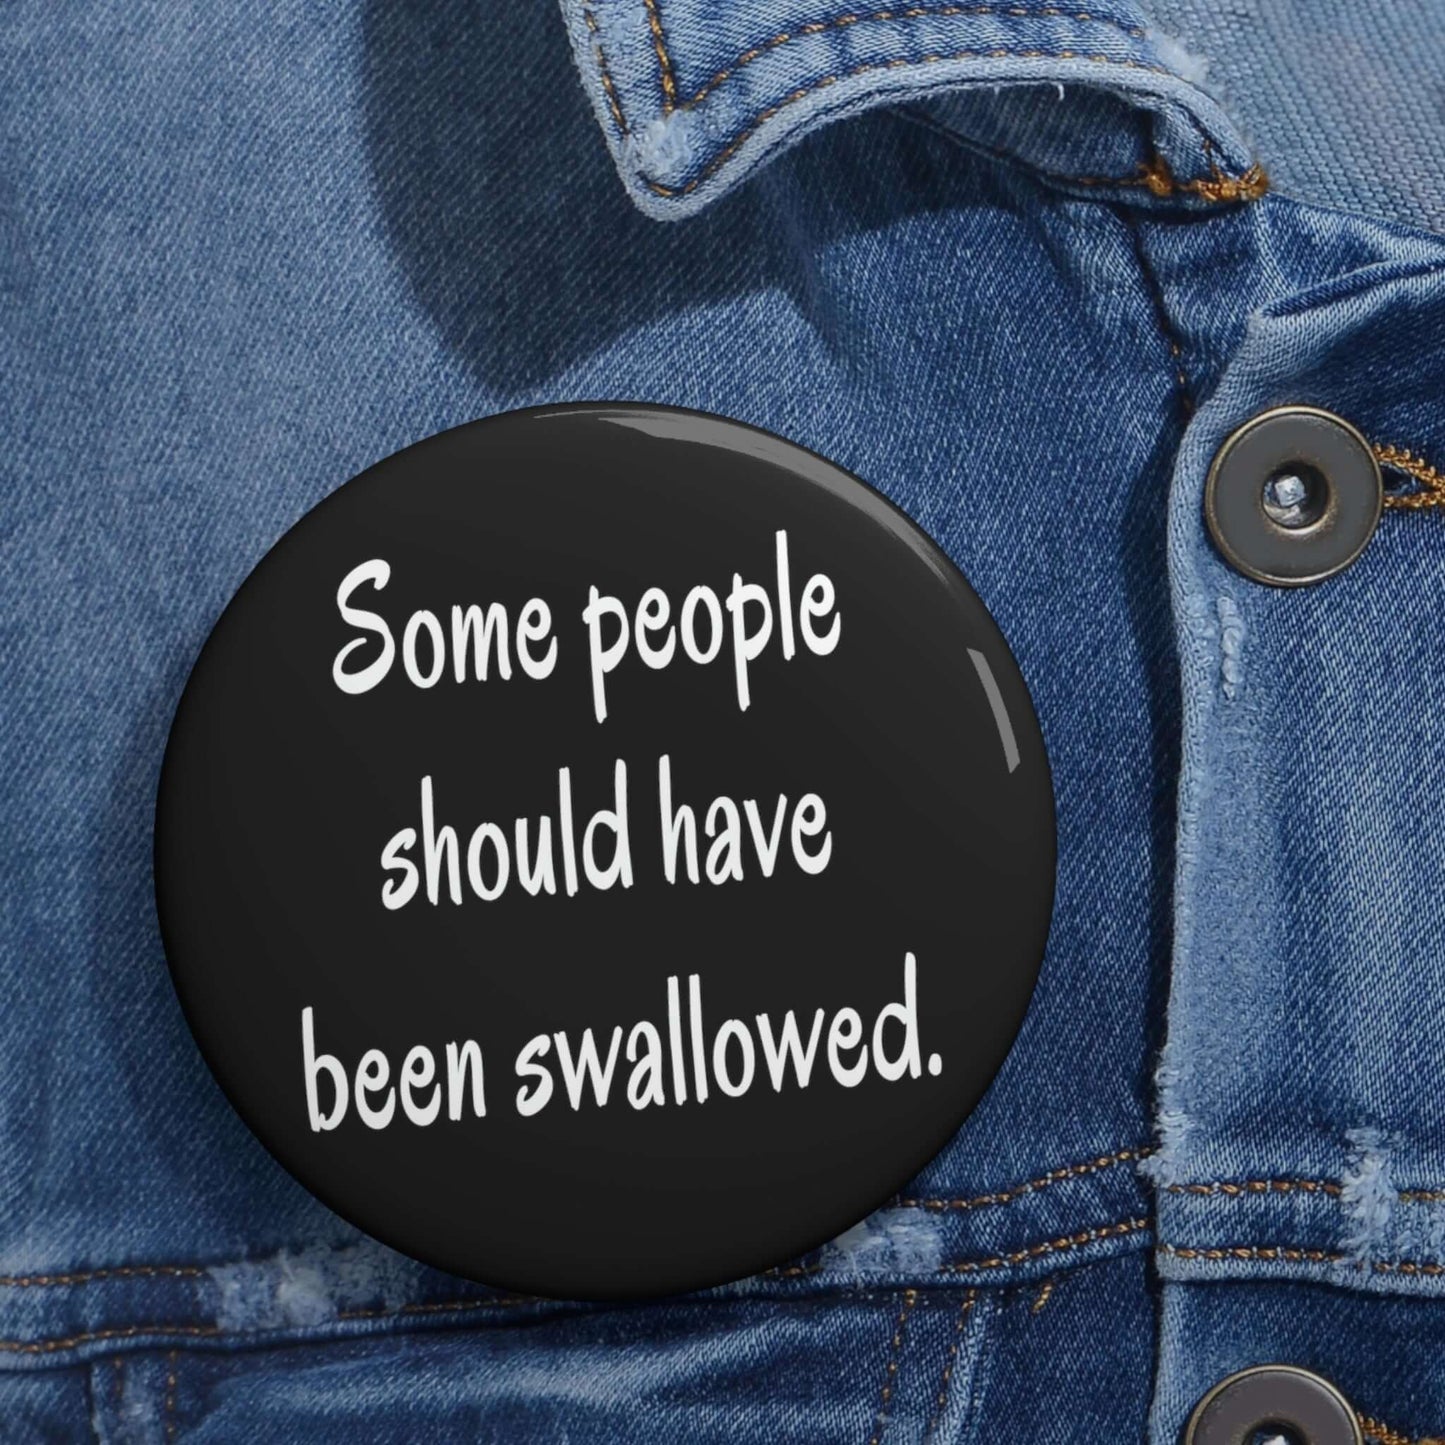 Pinback button that says some people should have been swallowed.